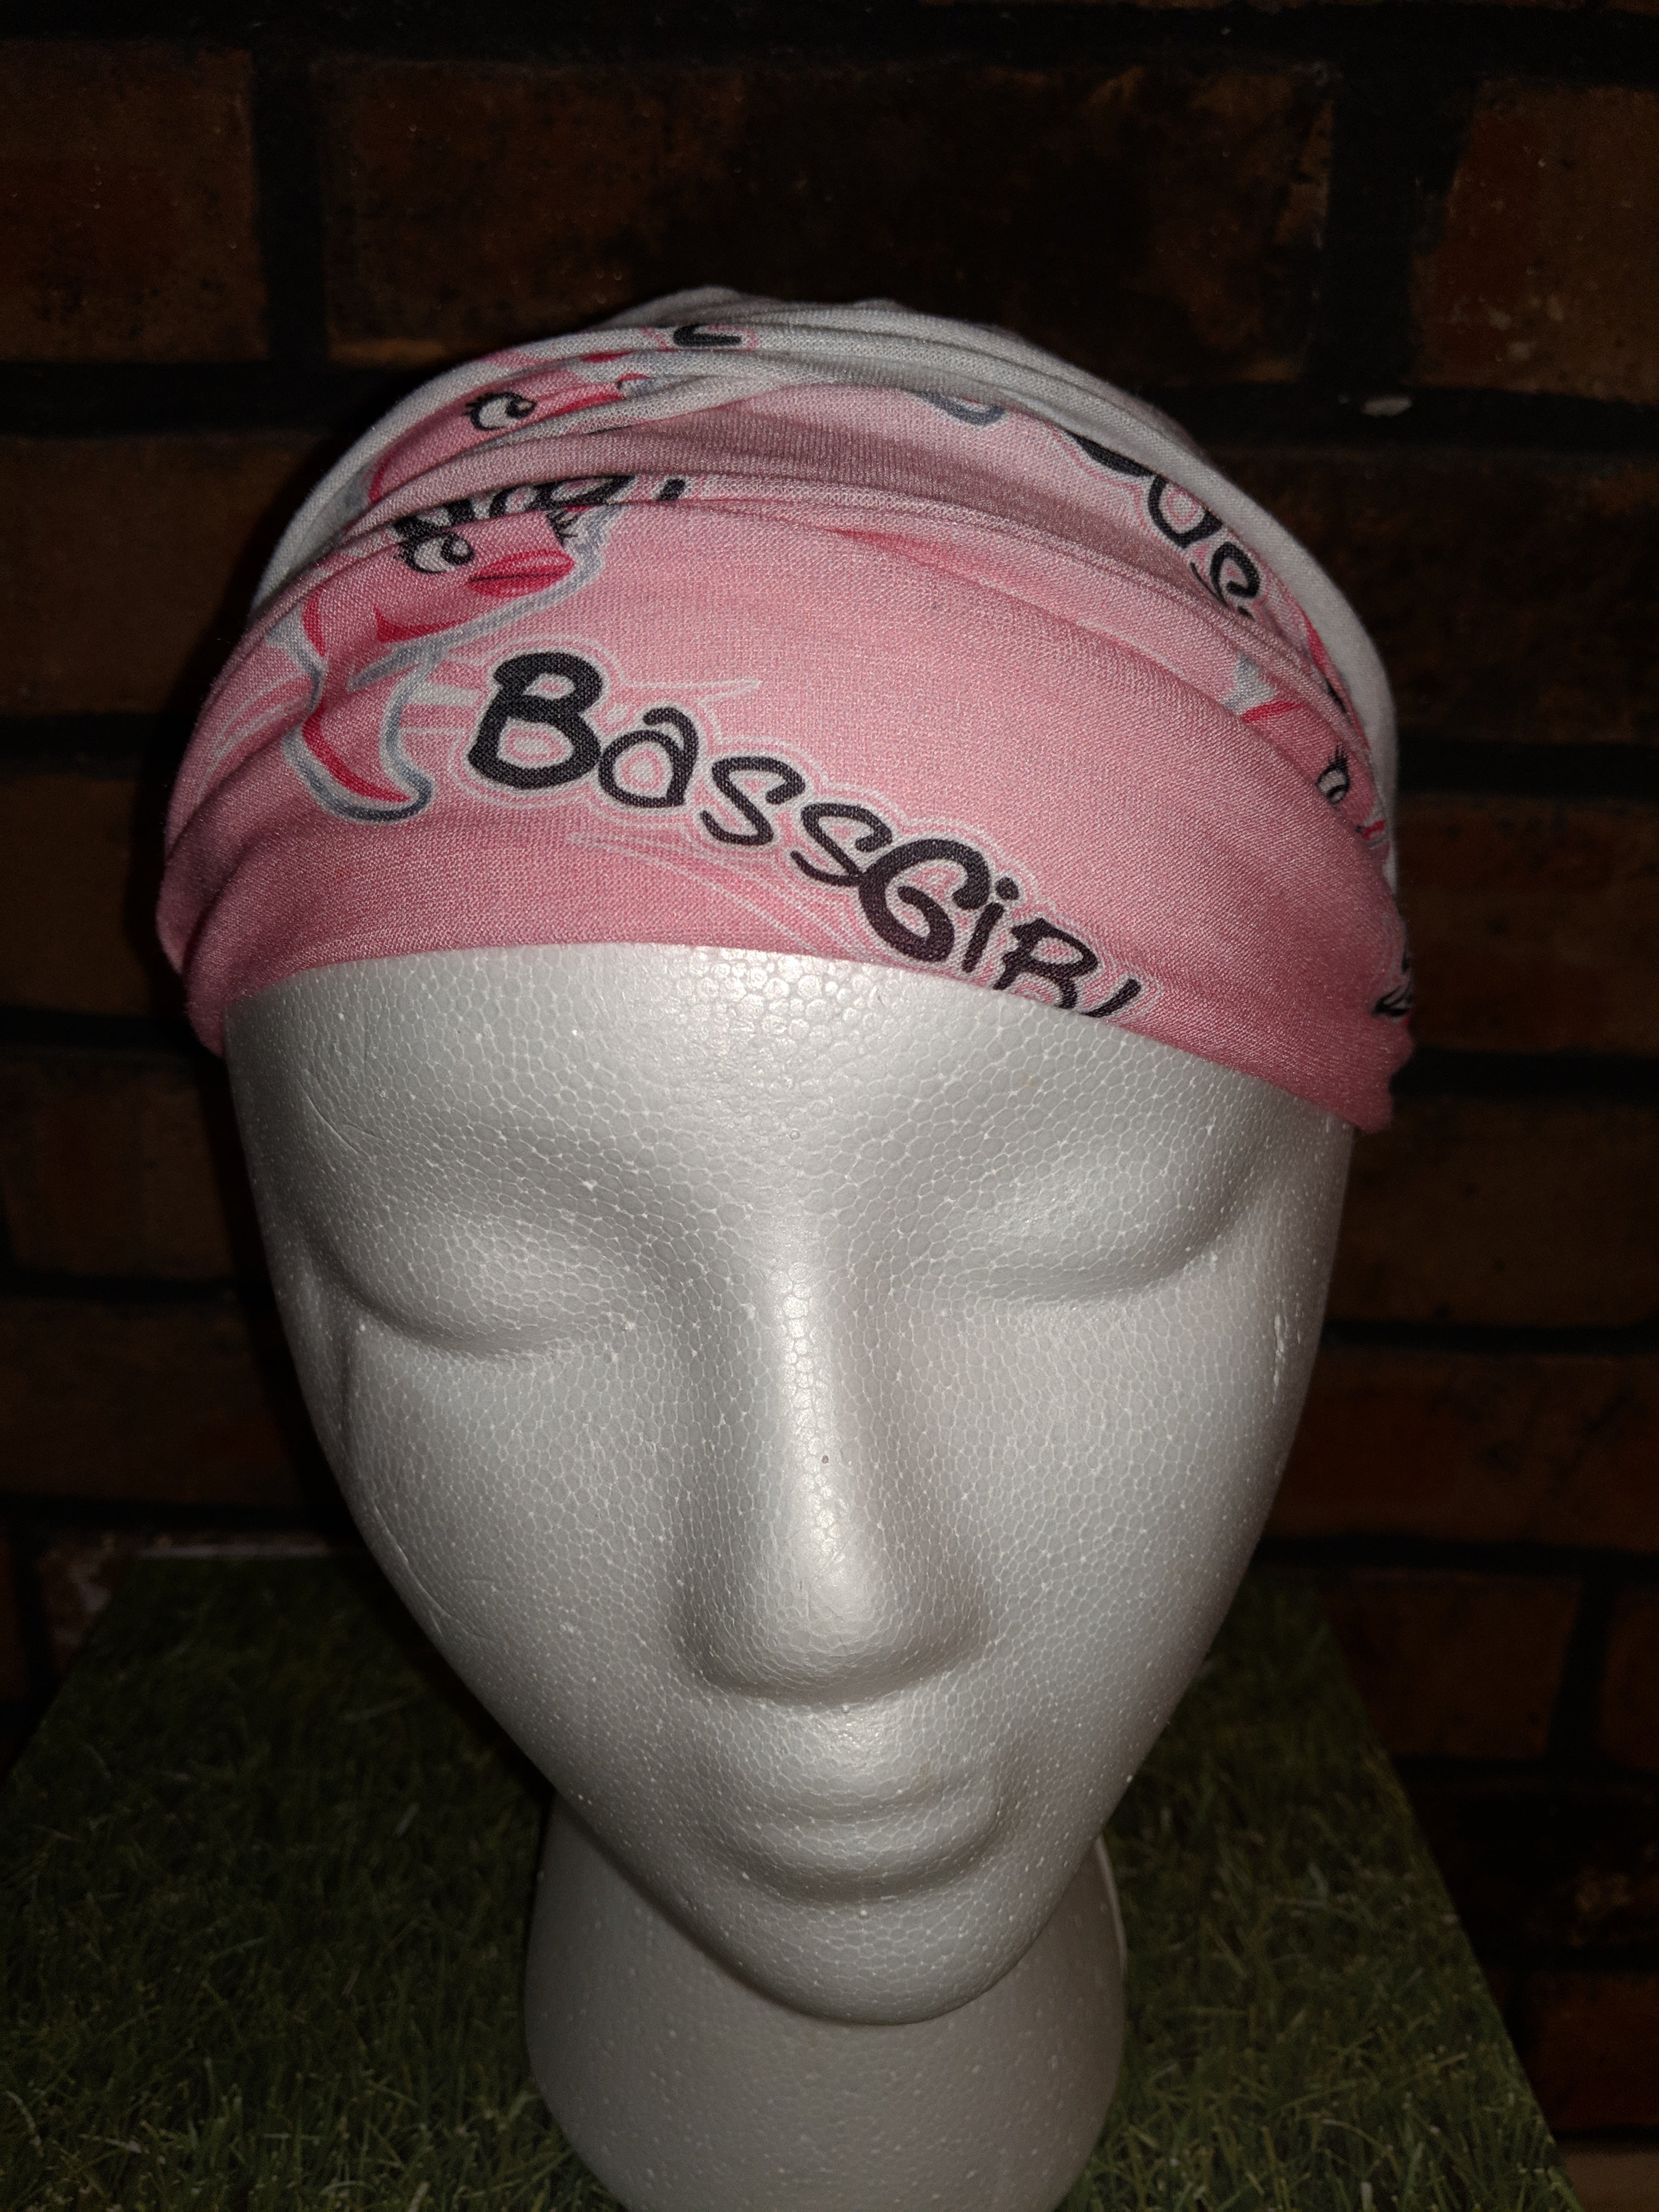 Women's headband bandana. Neck gaitor that can be used as a face mask or headband. 